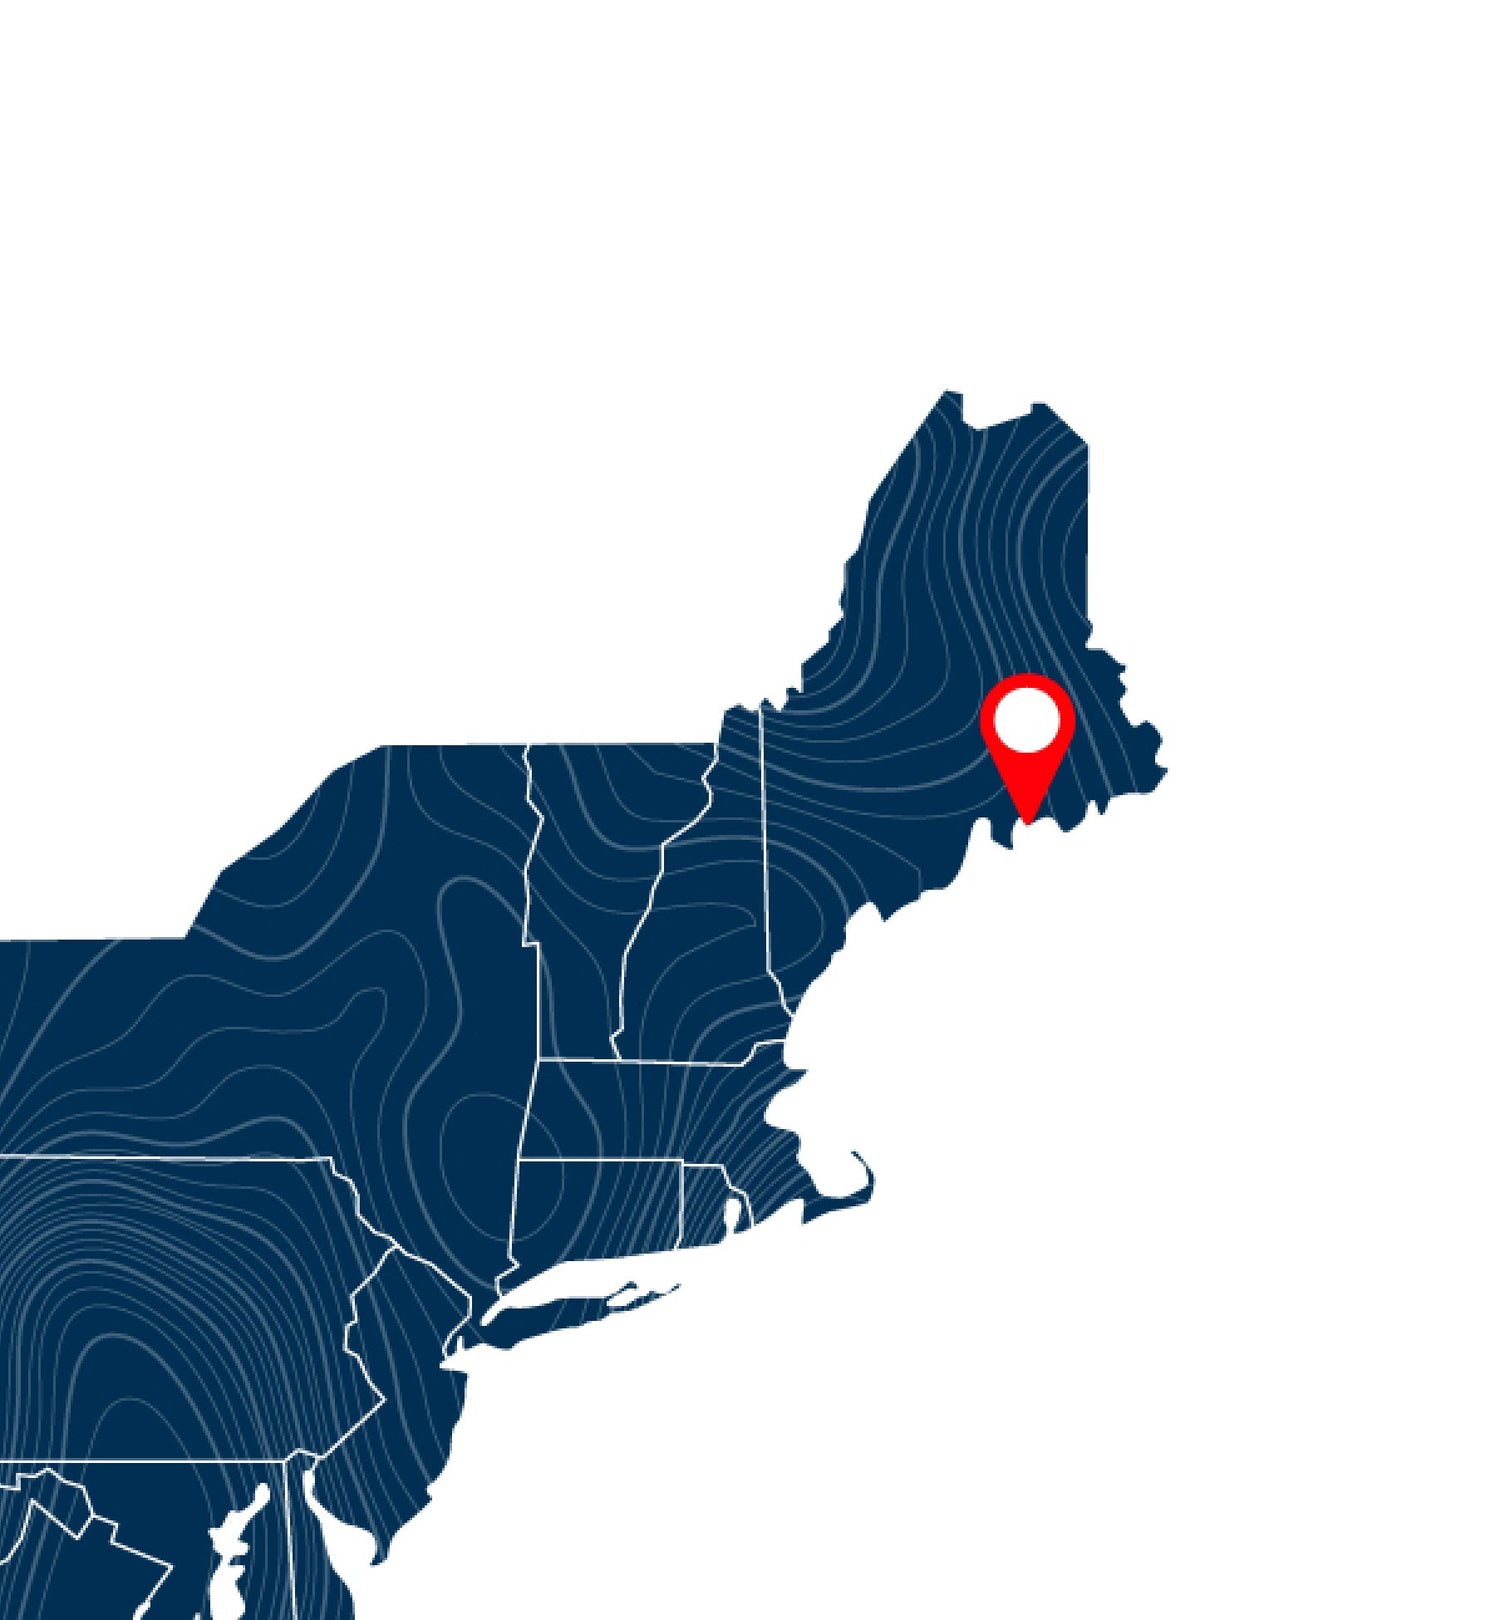 A map of new hampshire with a red pin.